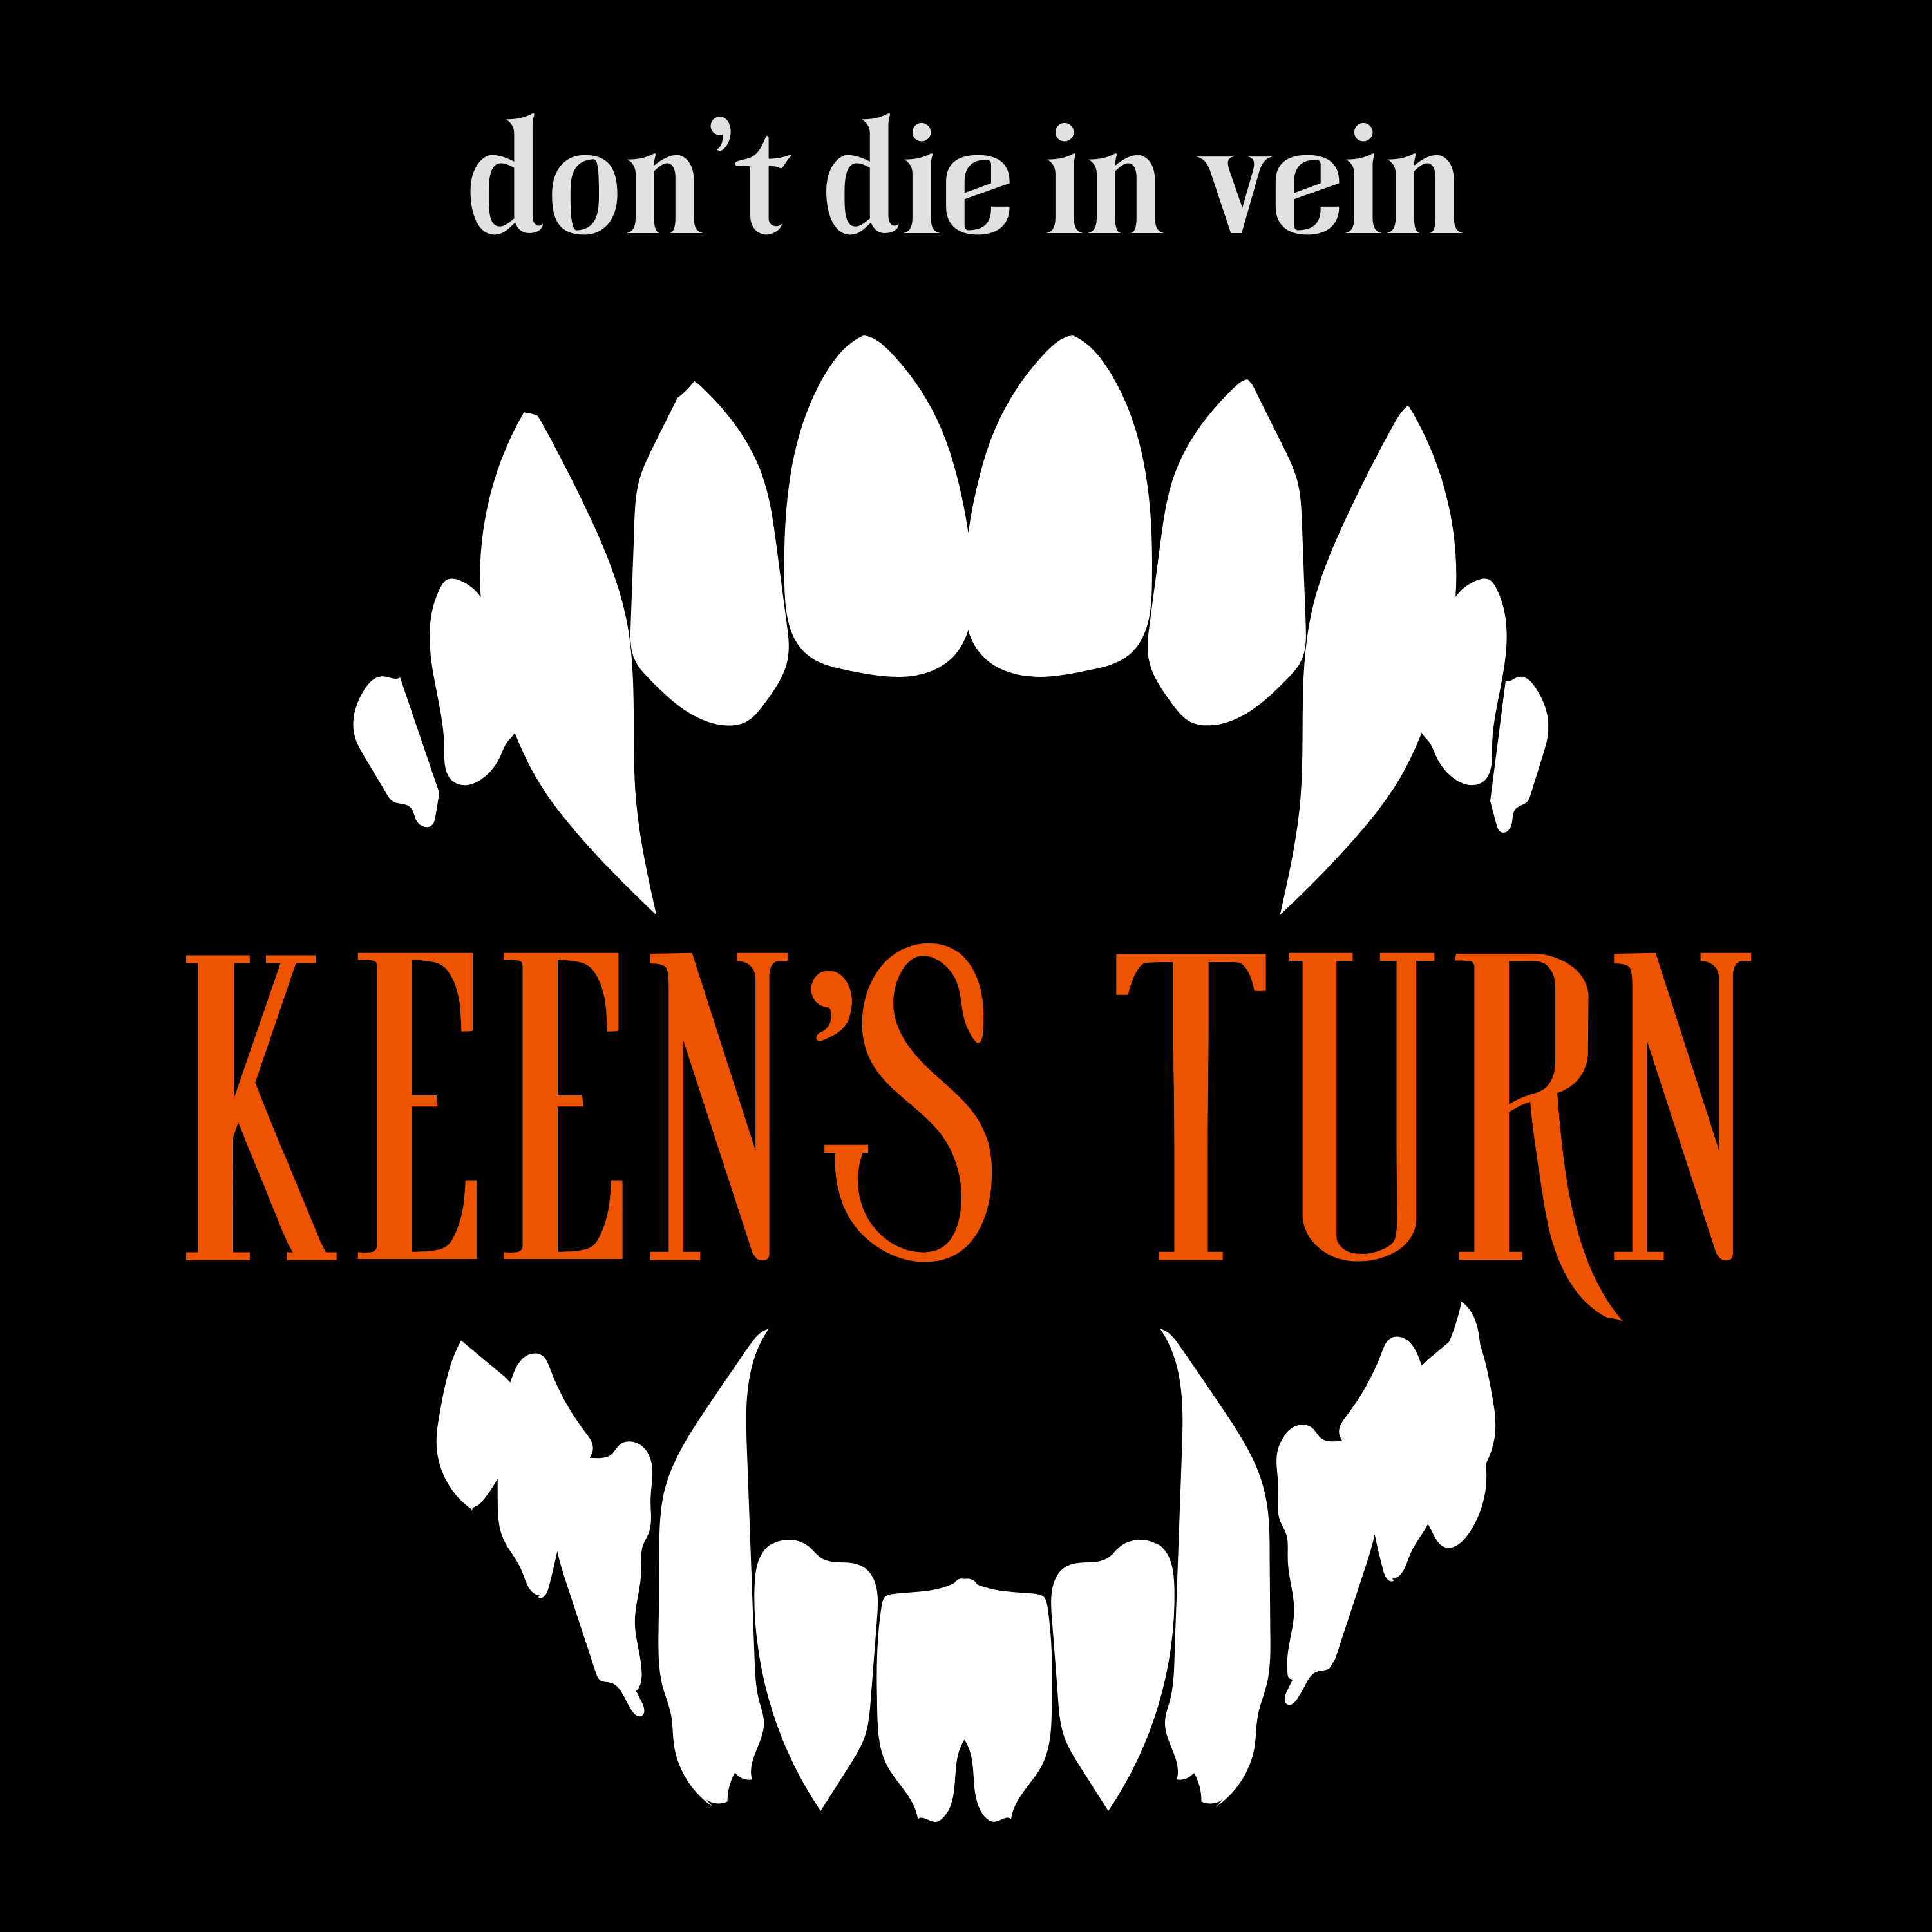 Podcast art for Star–Cross: Keen's Turn, featuring vampire fangs and subtitle "don't die in vein"